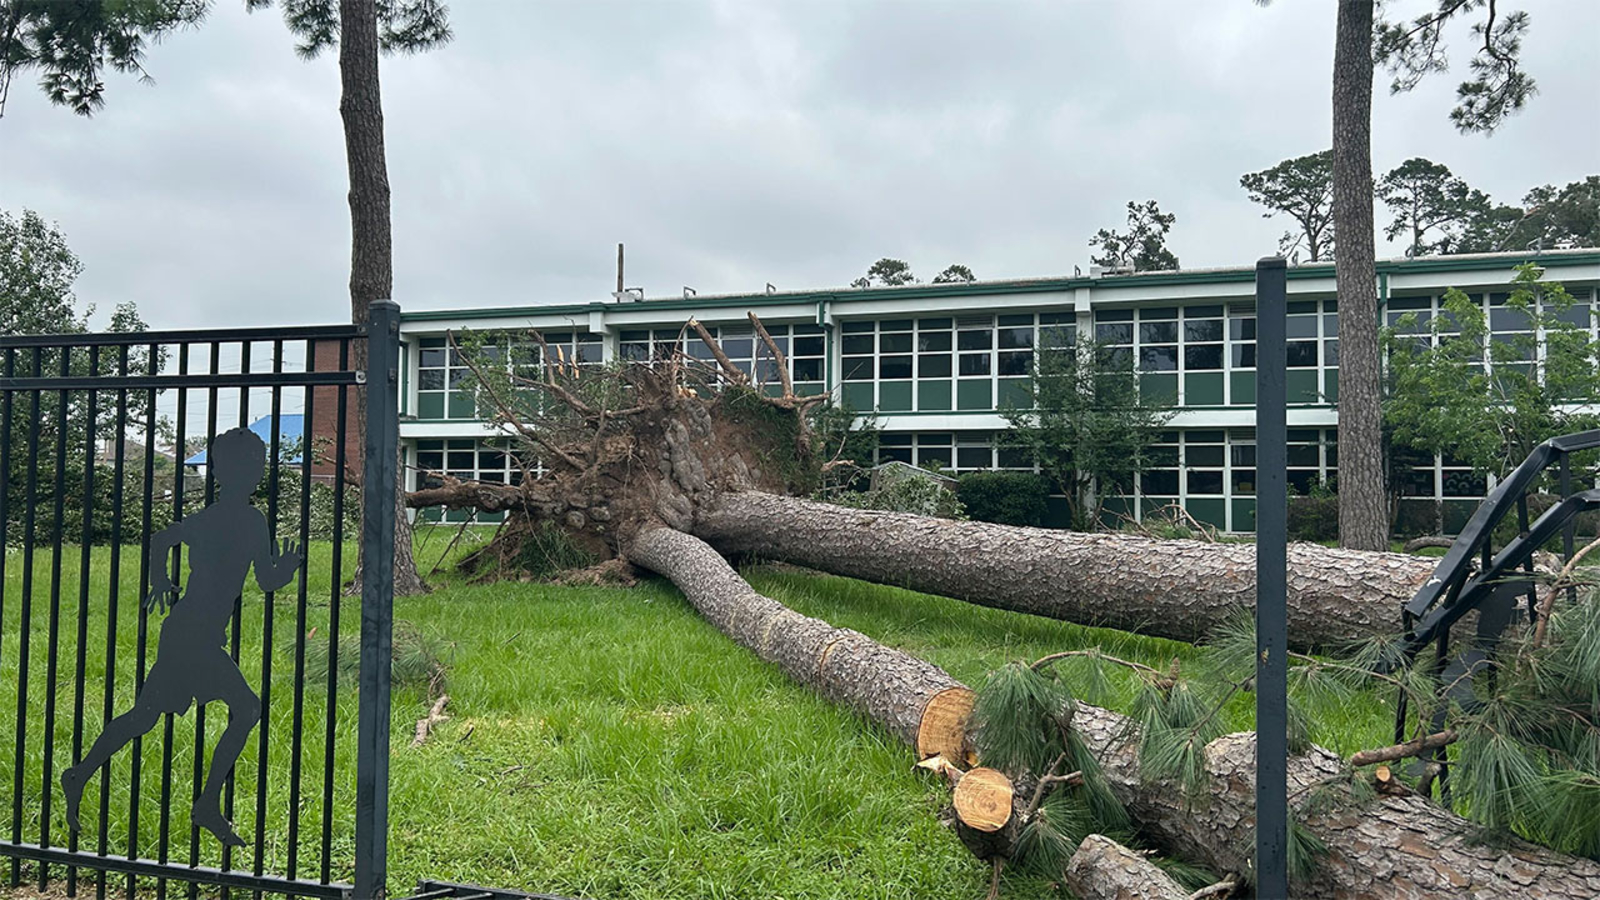 HISD school storm damage: 2 Houston ISD students injured, hundreds of campuses without power [Video]